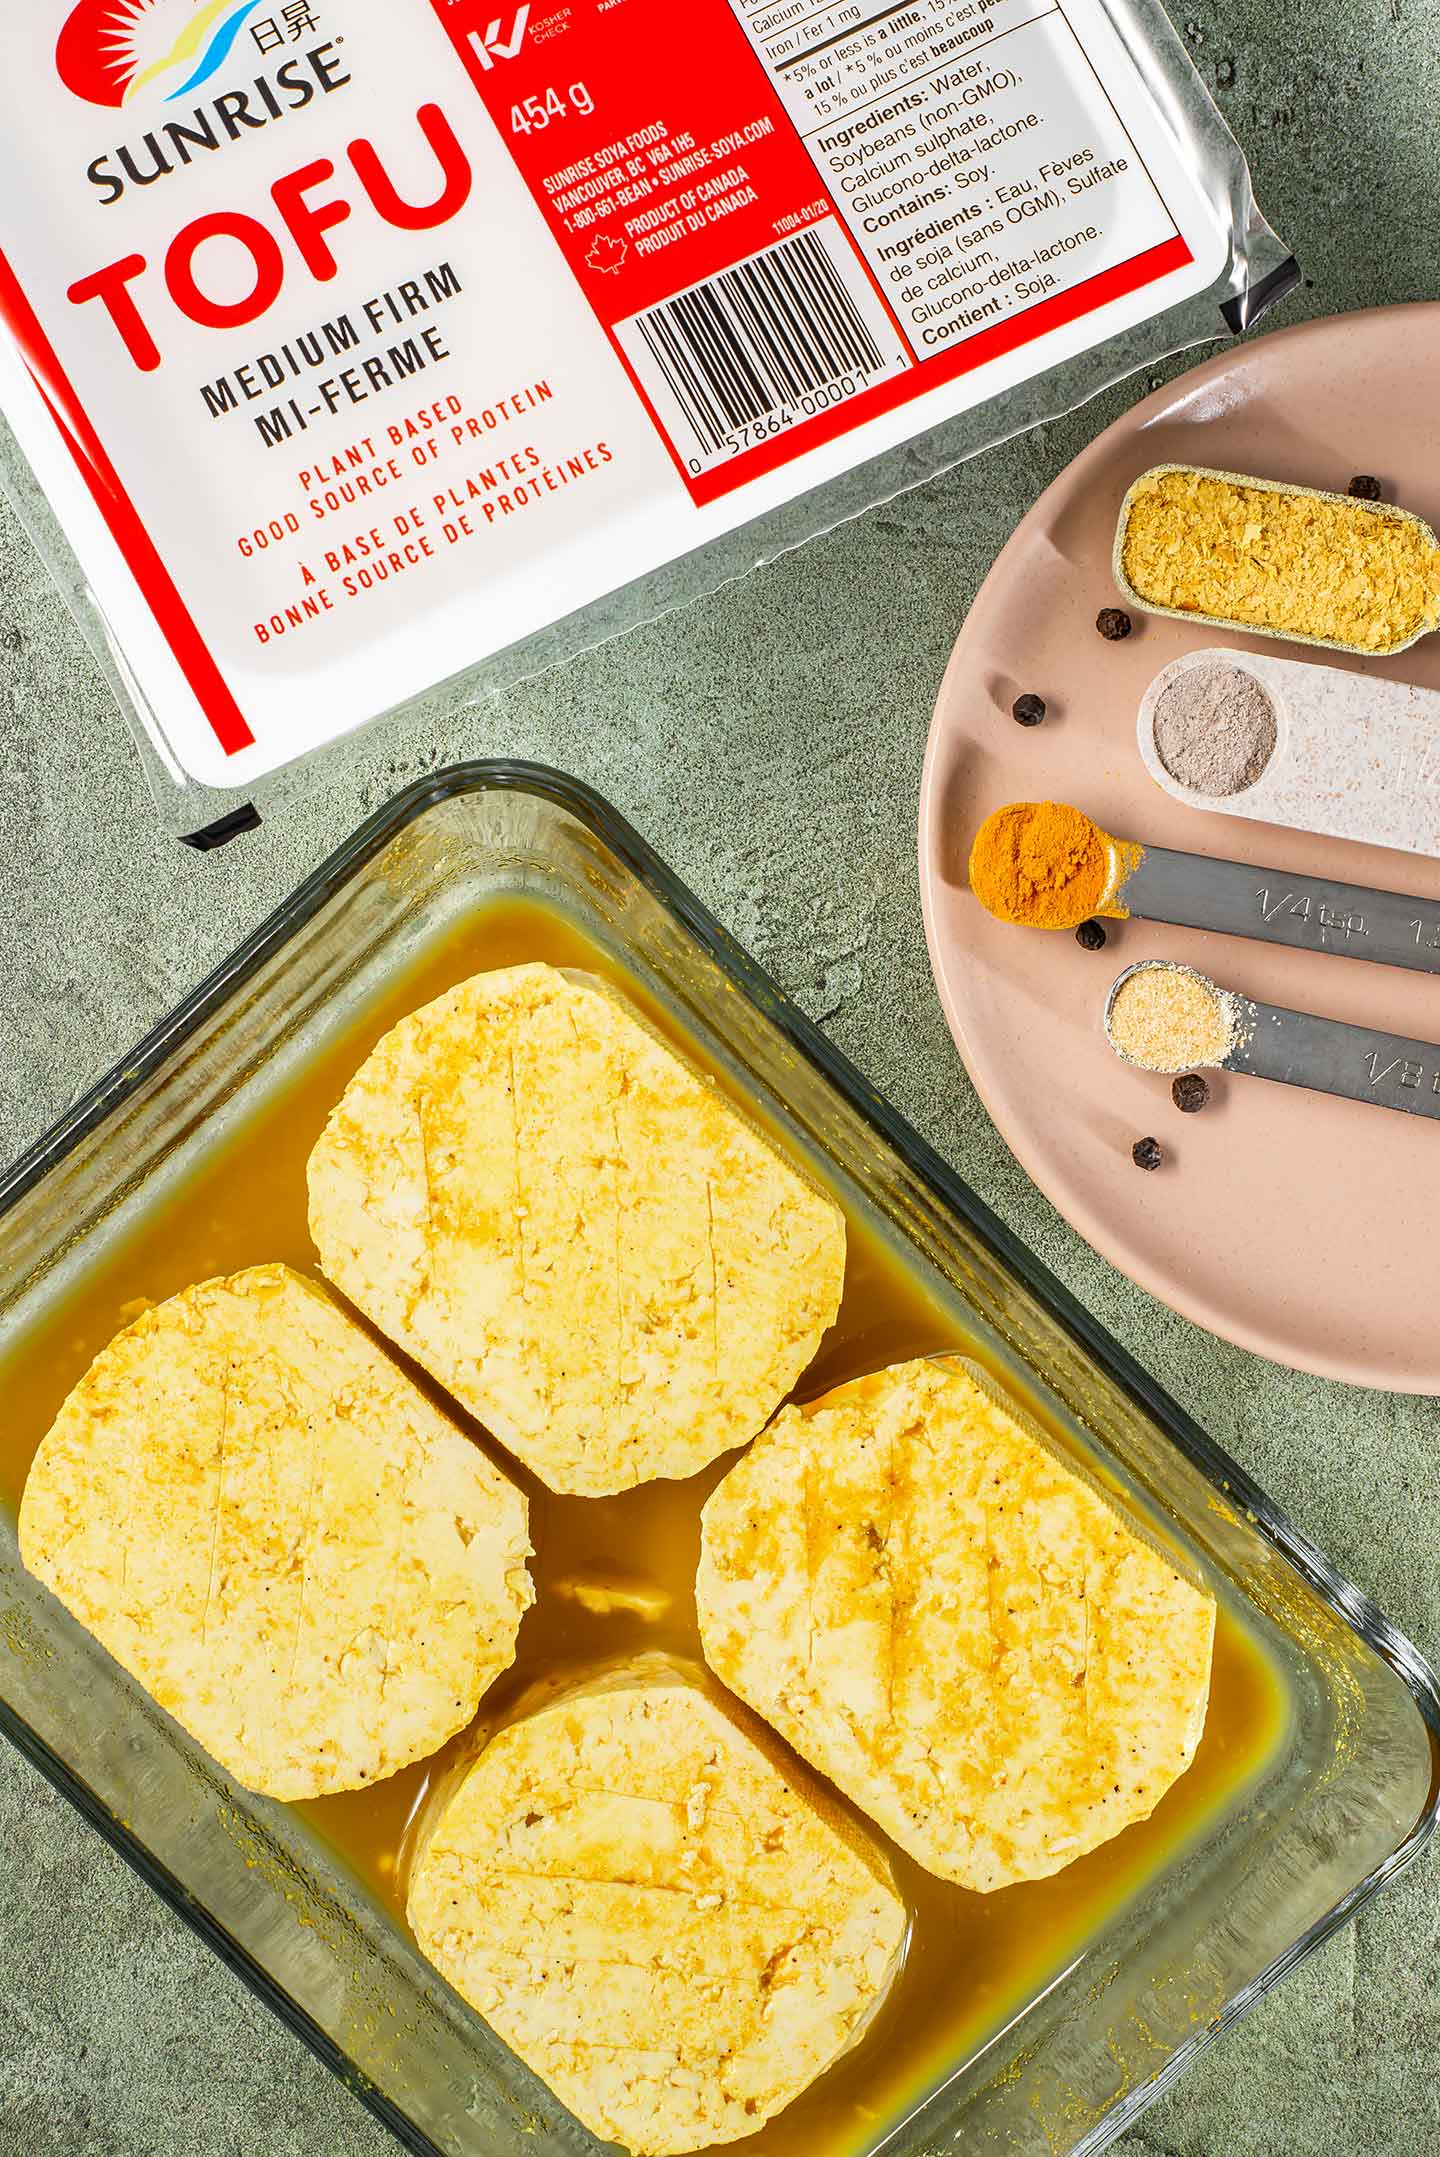 Top down view of four tofu eggs marinating in a turmeric sauce. A package of medium firm tofu is also pictured.